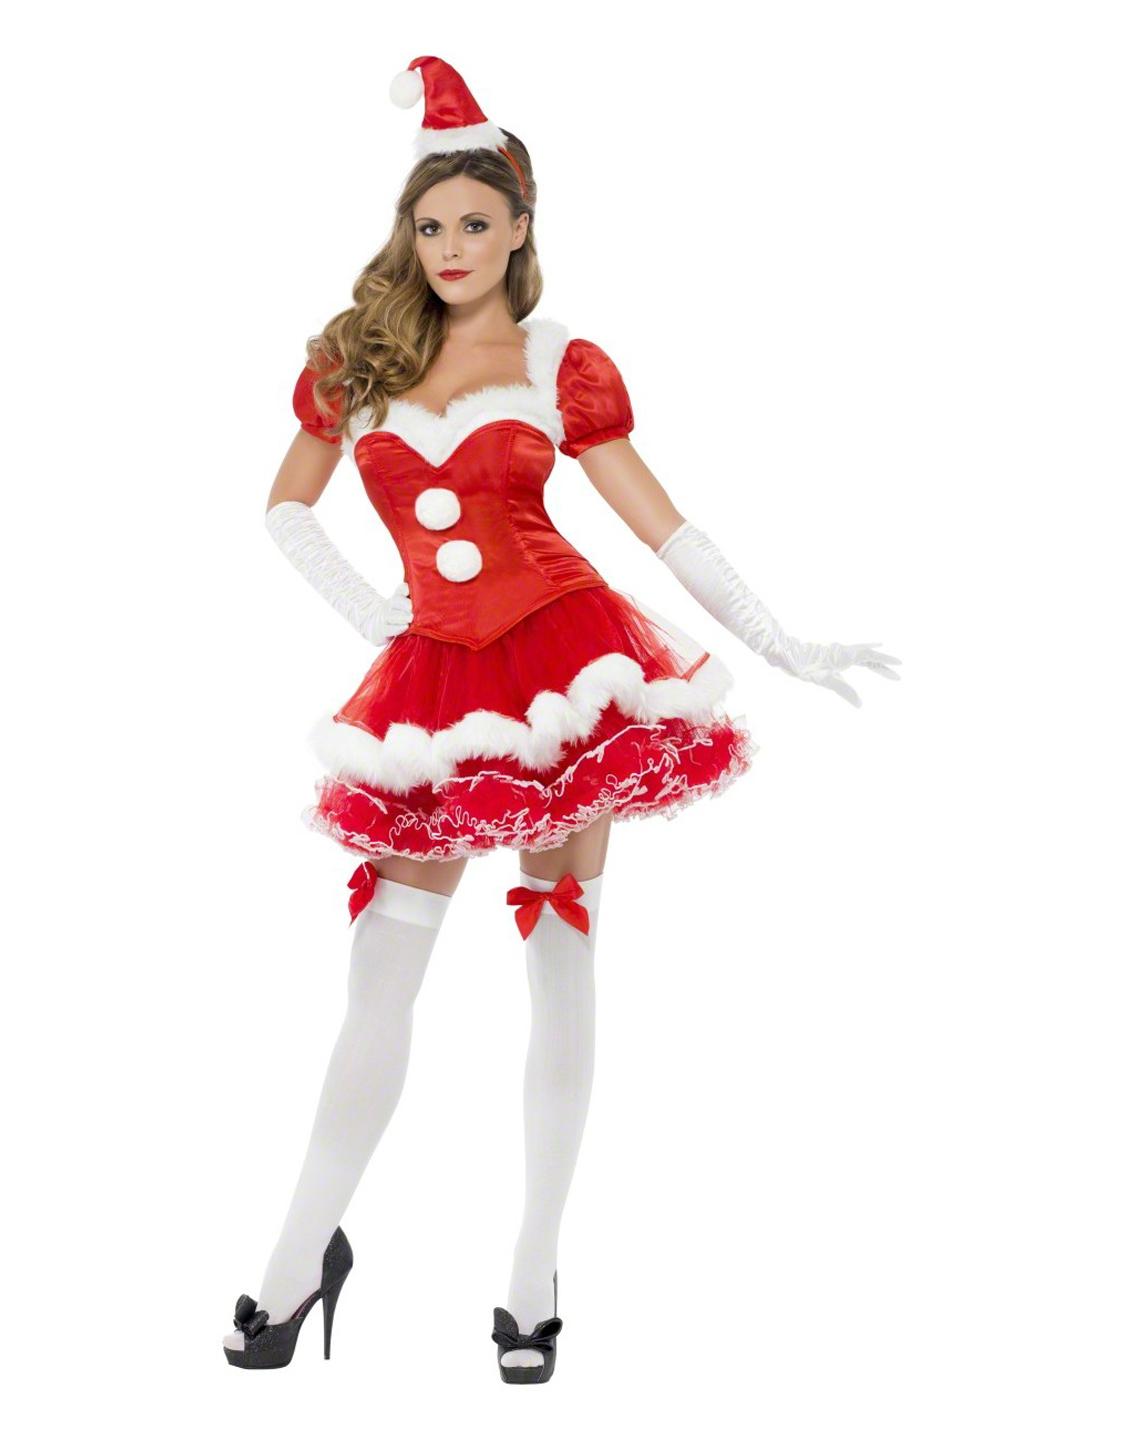 Royal-Red-Lovely-Christmas-Costume-W204032-1